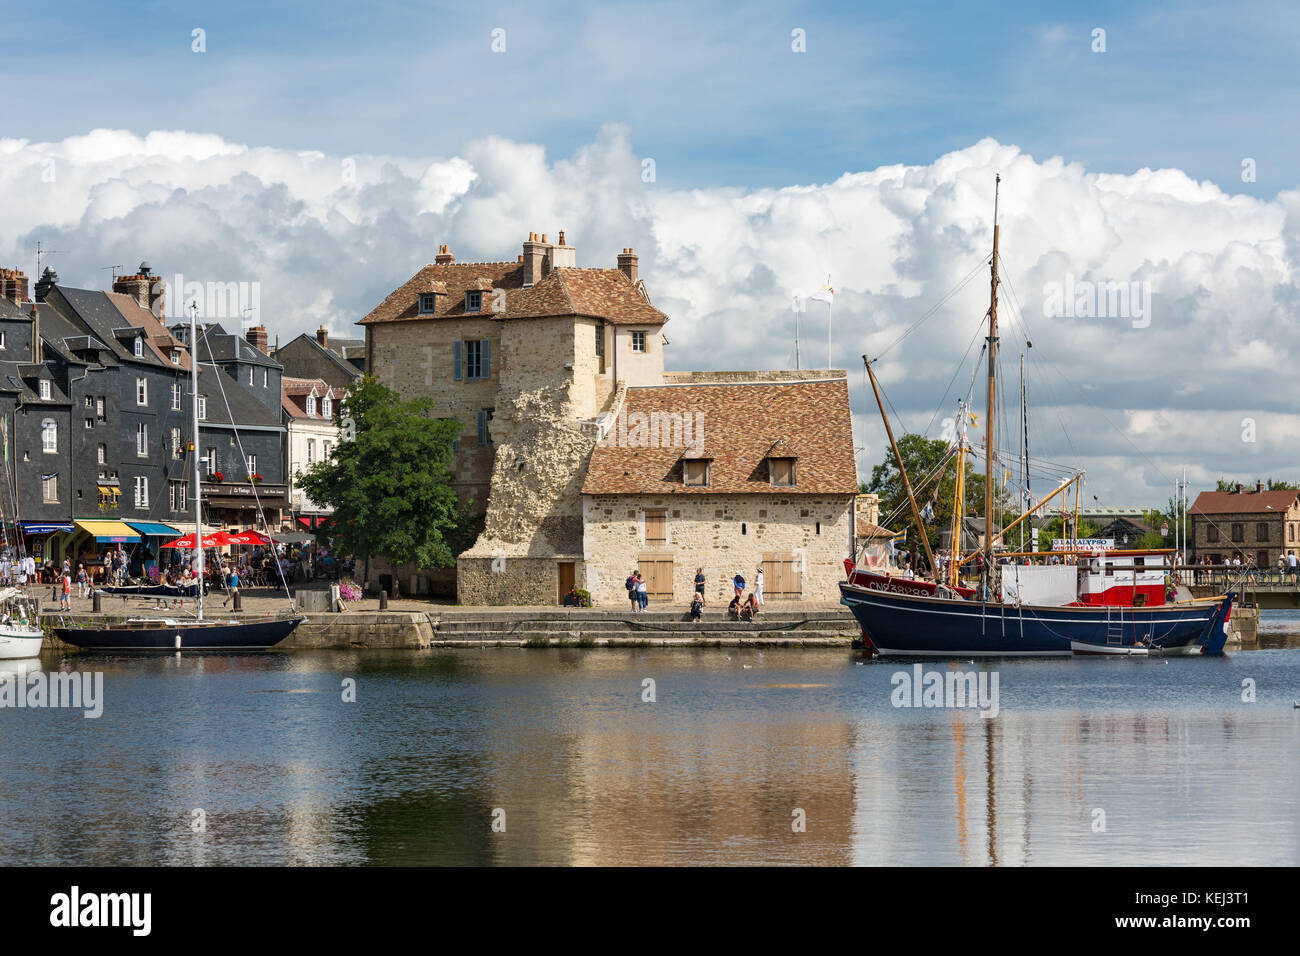 HONFLEUR, FRANCE - AUGUST 24, 2017: Harbor of historic city Honfleur with moord sailing ships. An impressive cloud bank is approaching the city Stock Photo